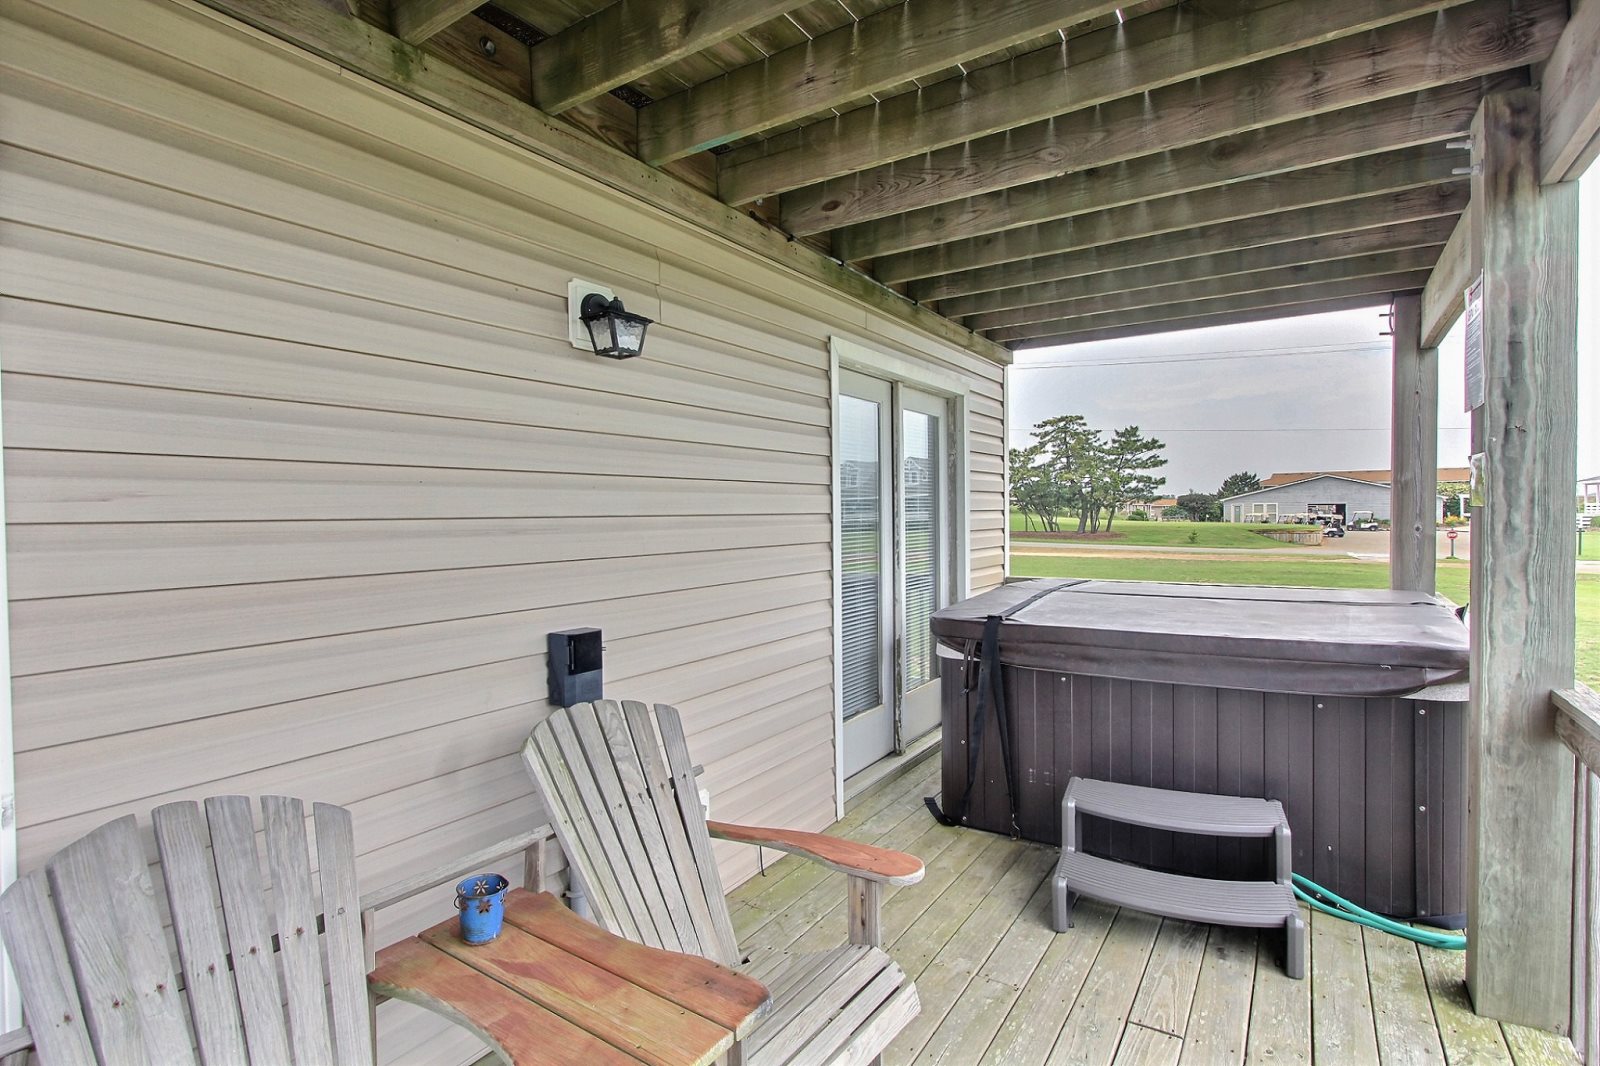 Covered Deck/Hot Tub